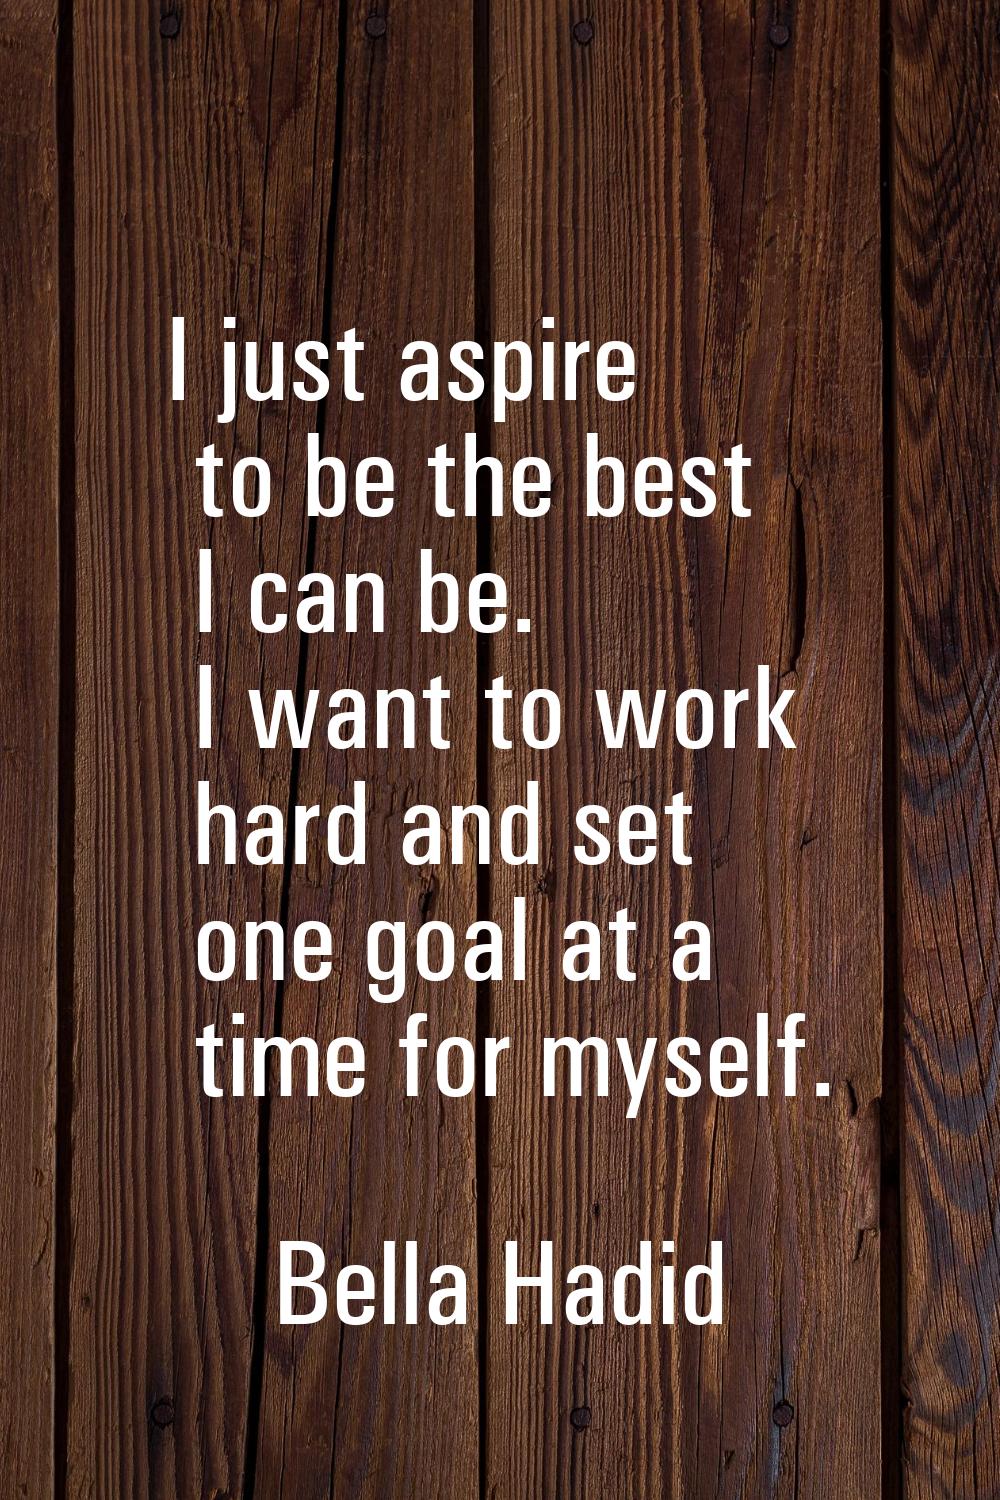 I just aspire to be the best I can be. I want to work hard and set one goal at a time for myself.